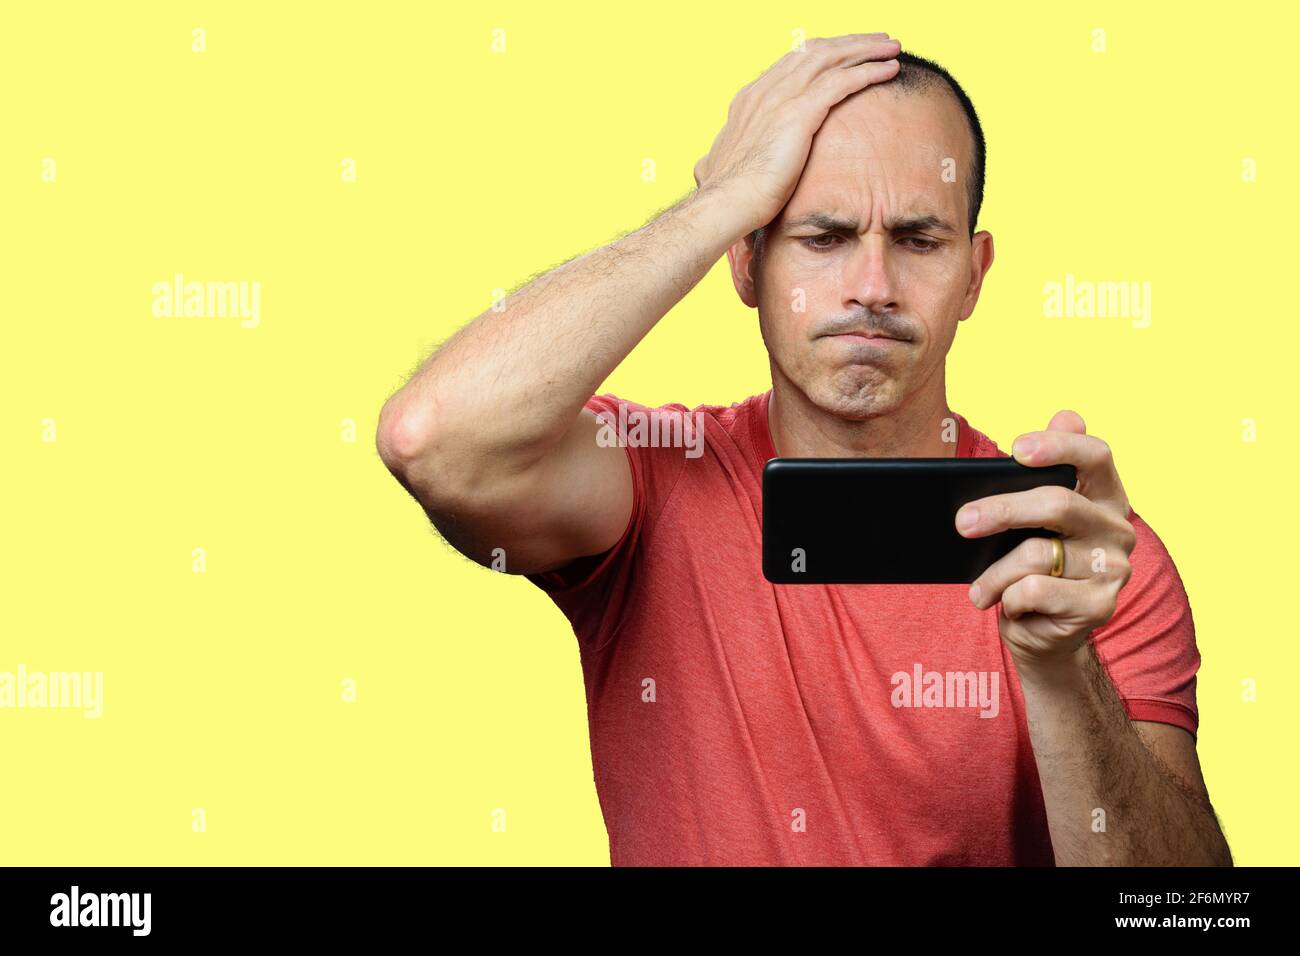 Mature man in casual clothing, disappointed, with his hand lying on his head and holding smartphone horizontally. Yellow background. Stock Photo